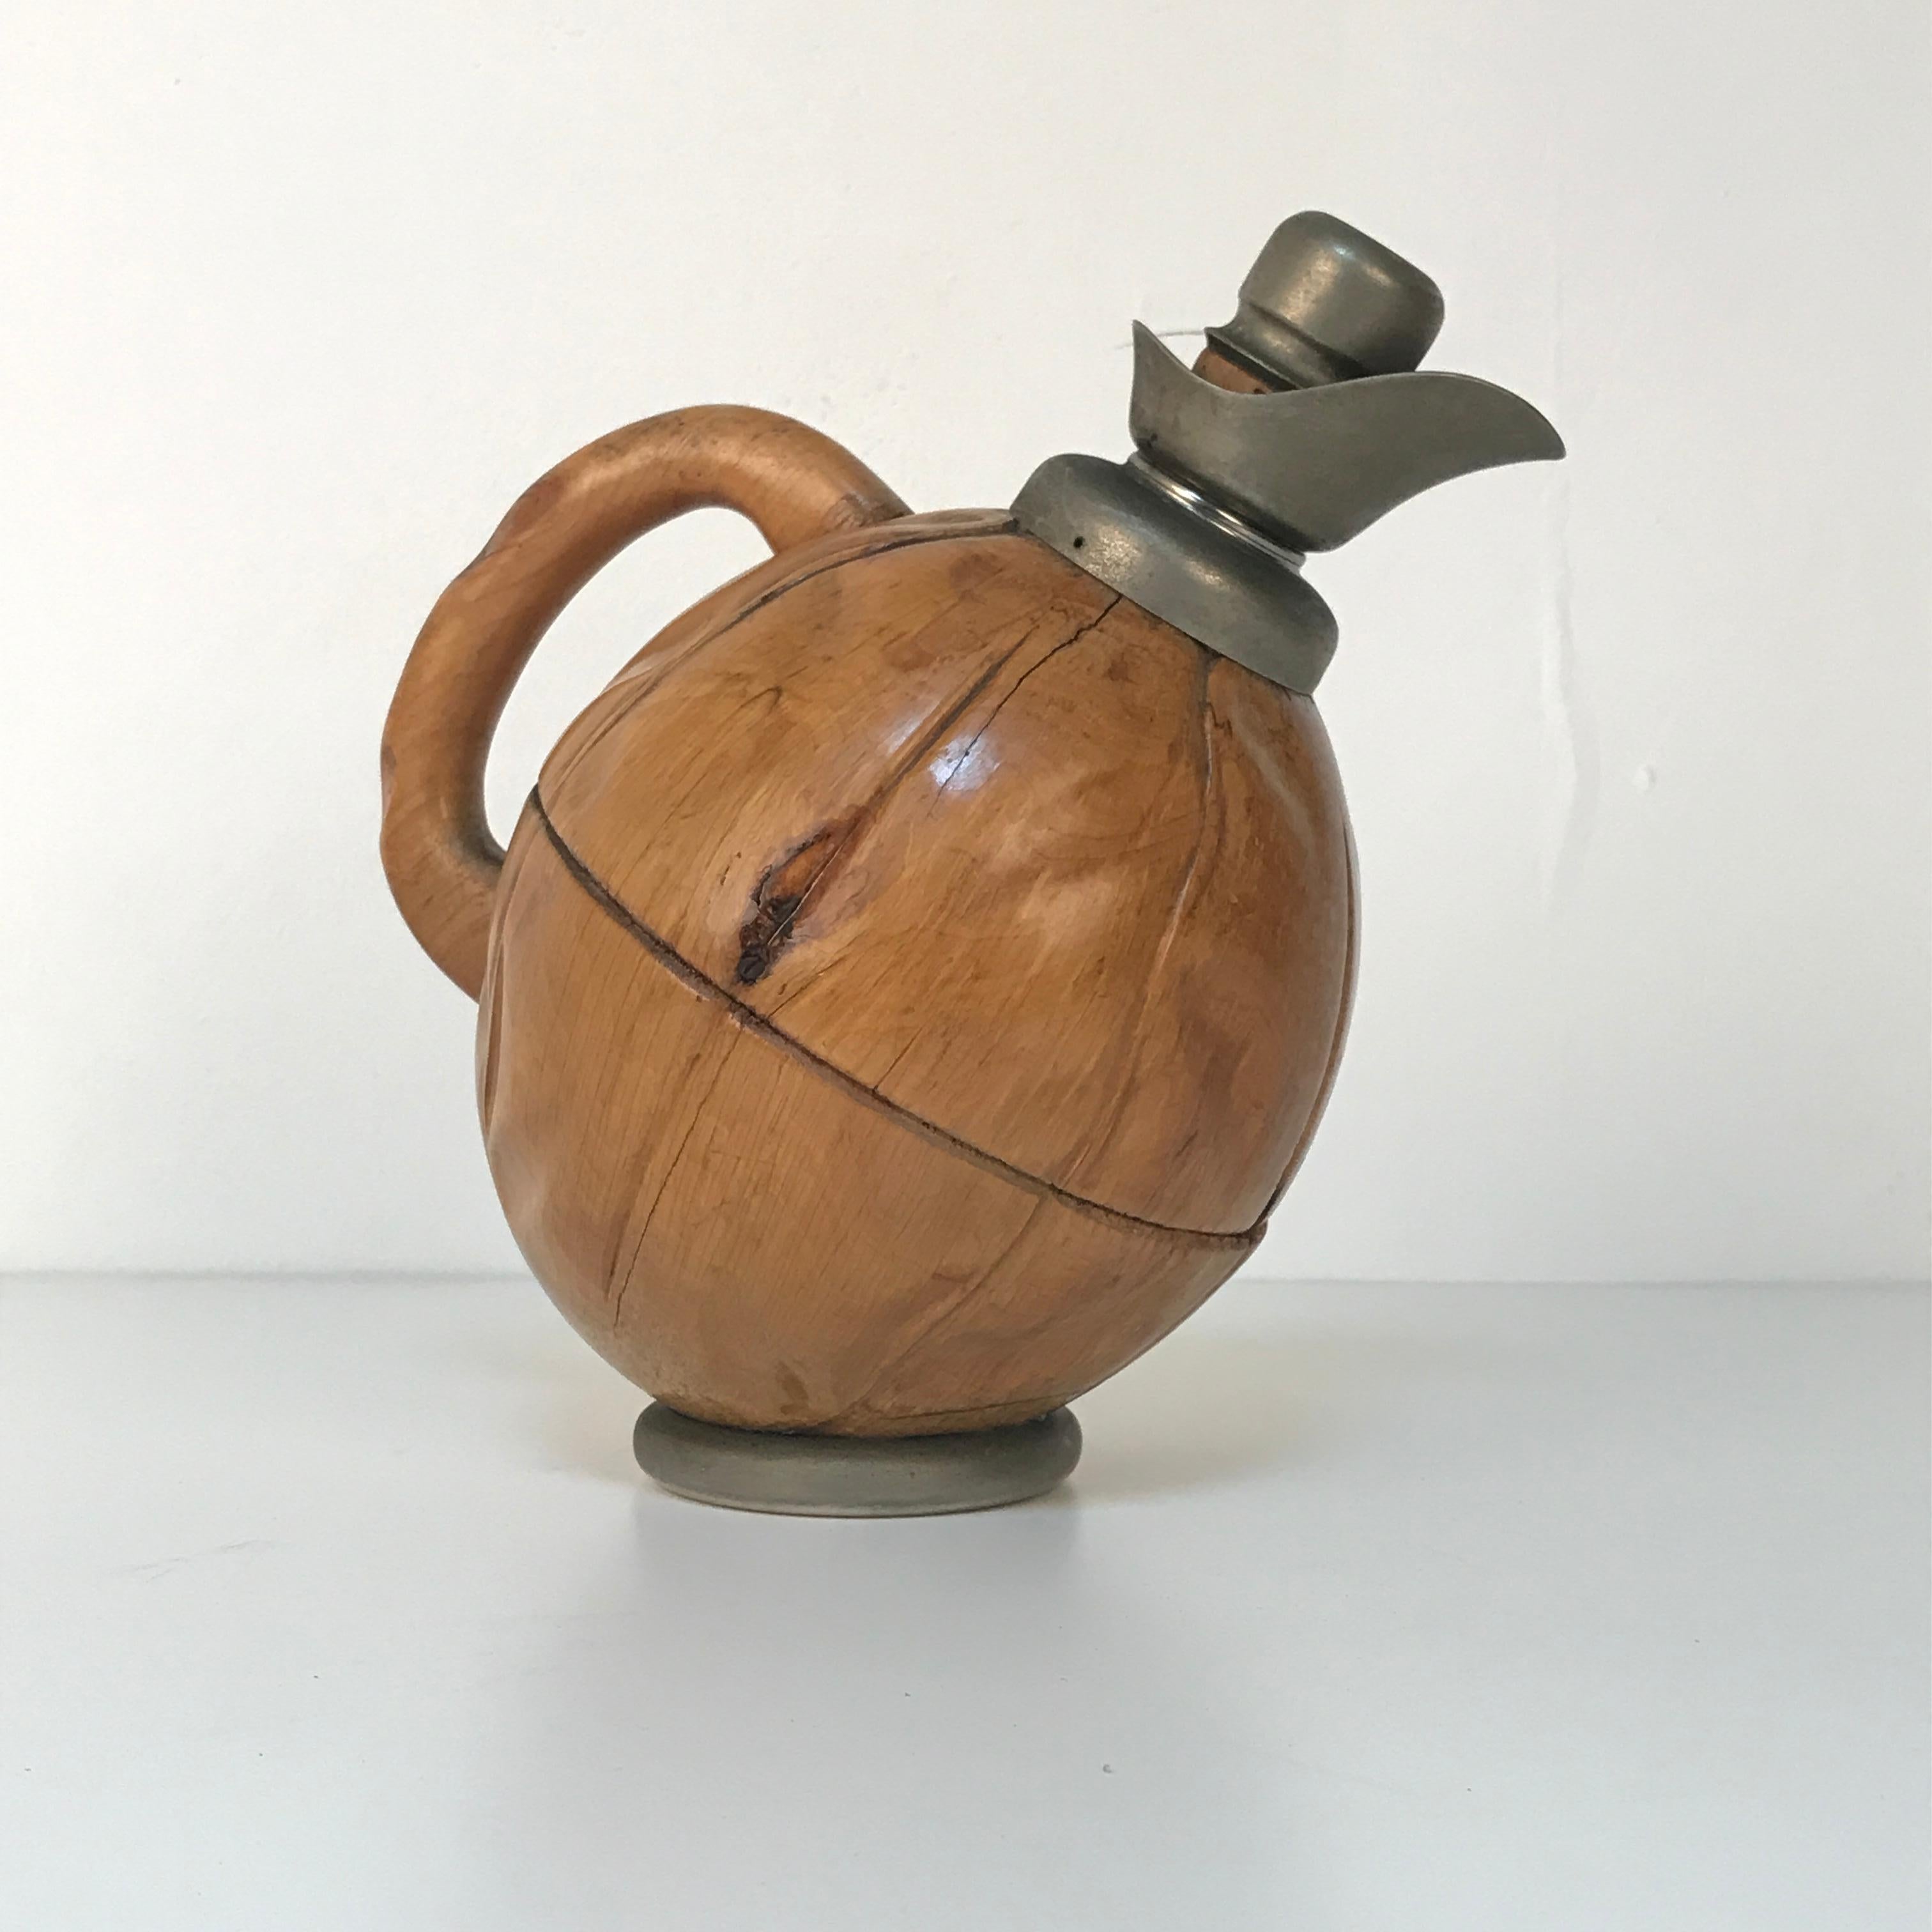 Metal Aldo Tura for Macabo, Thermos Decanter, Milan, Italy, 1950s, Wood Walnuts